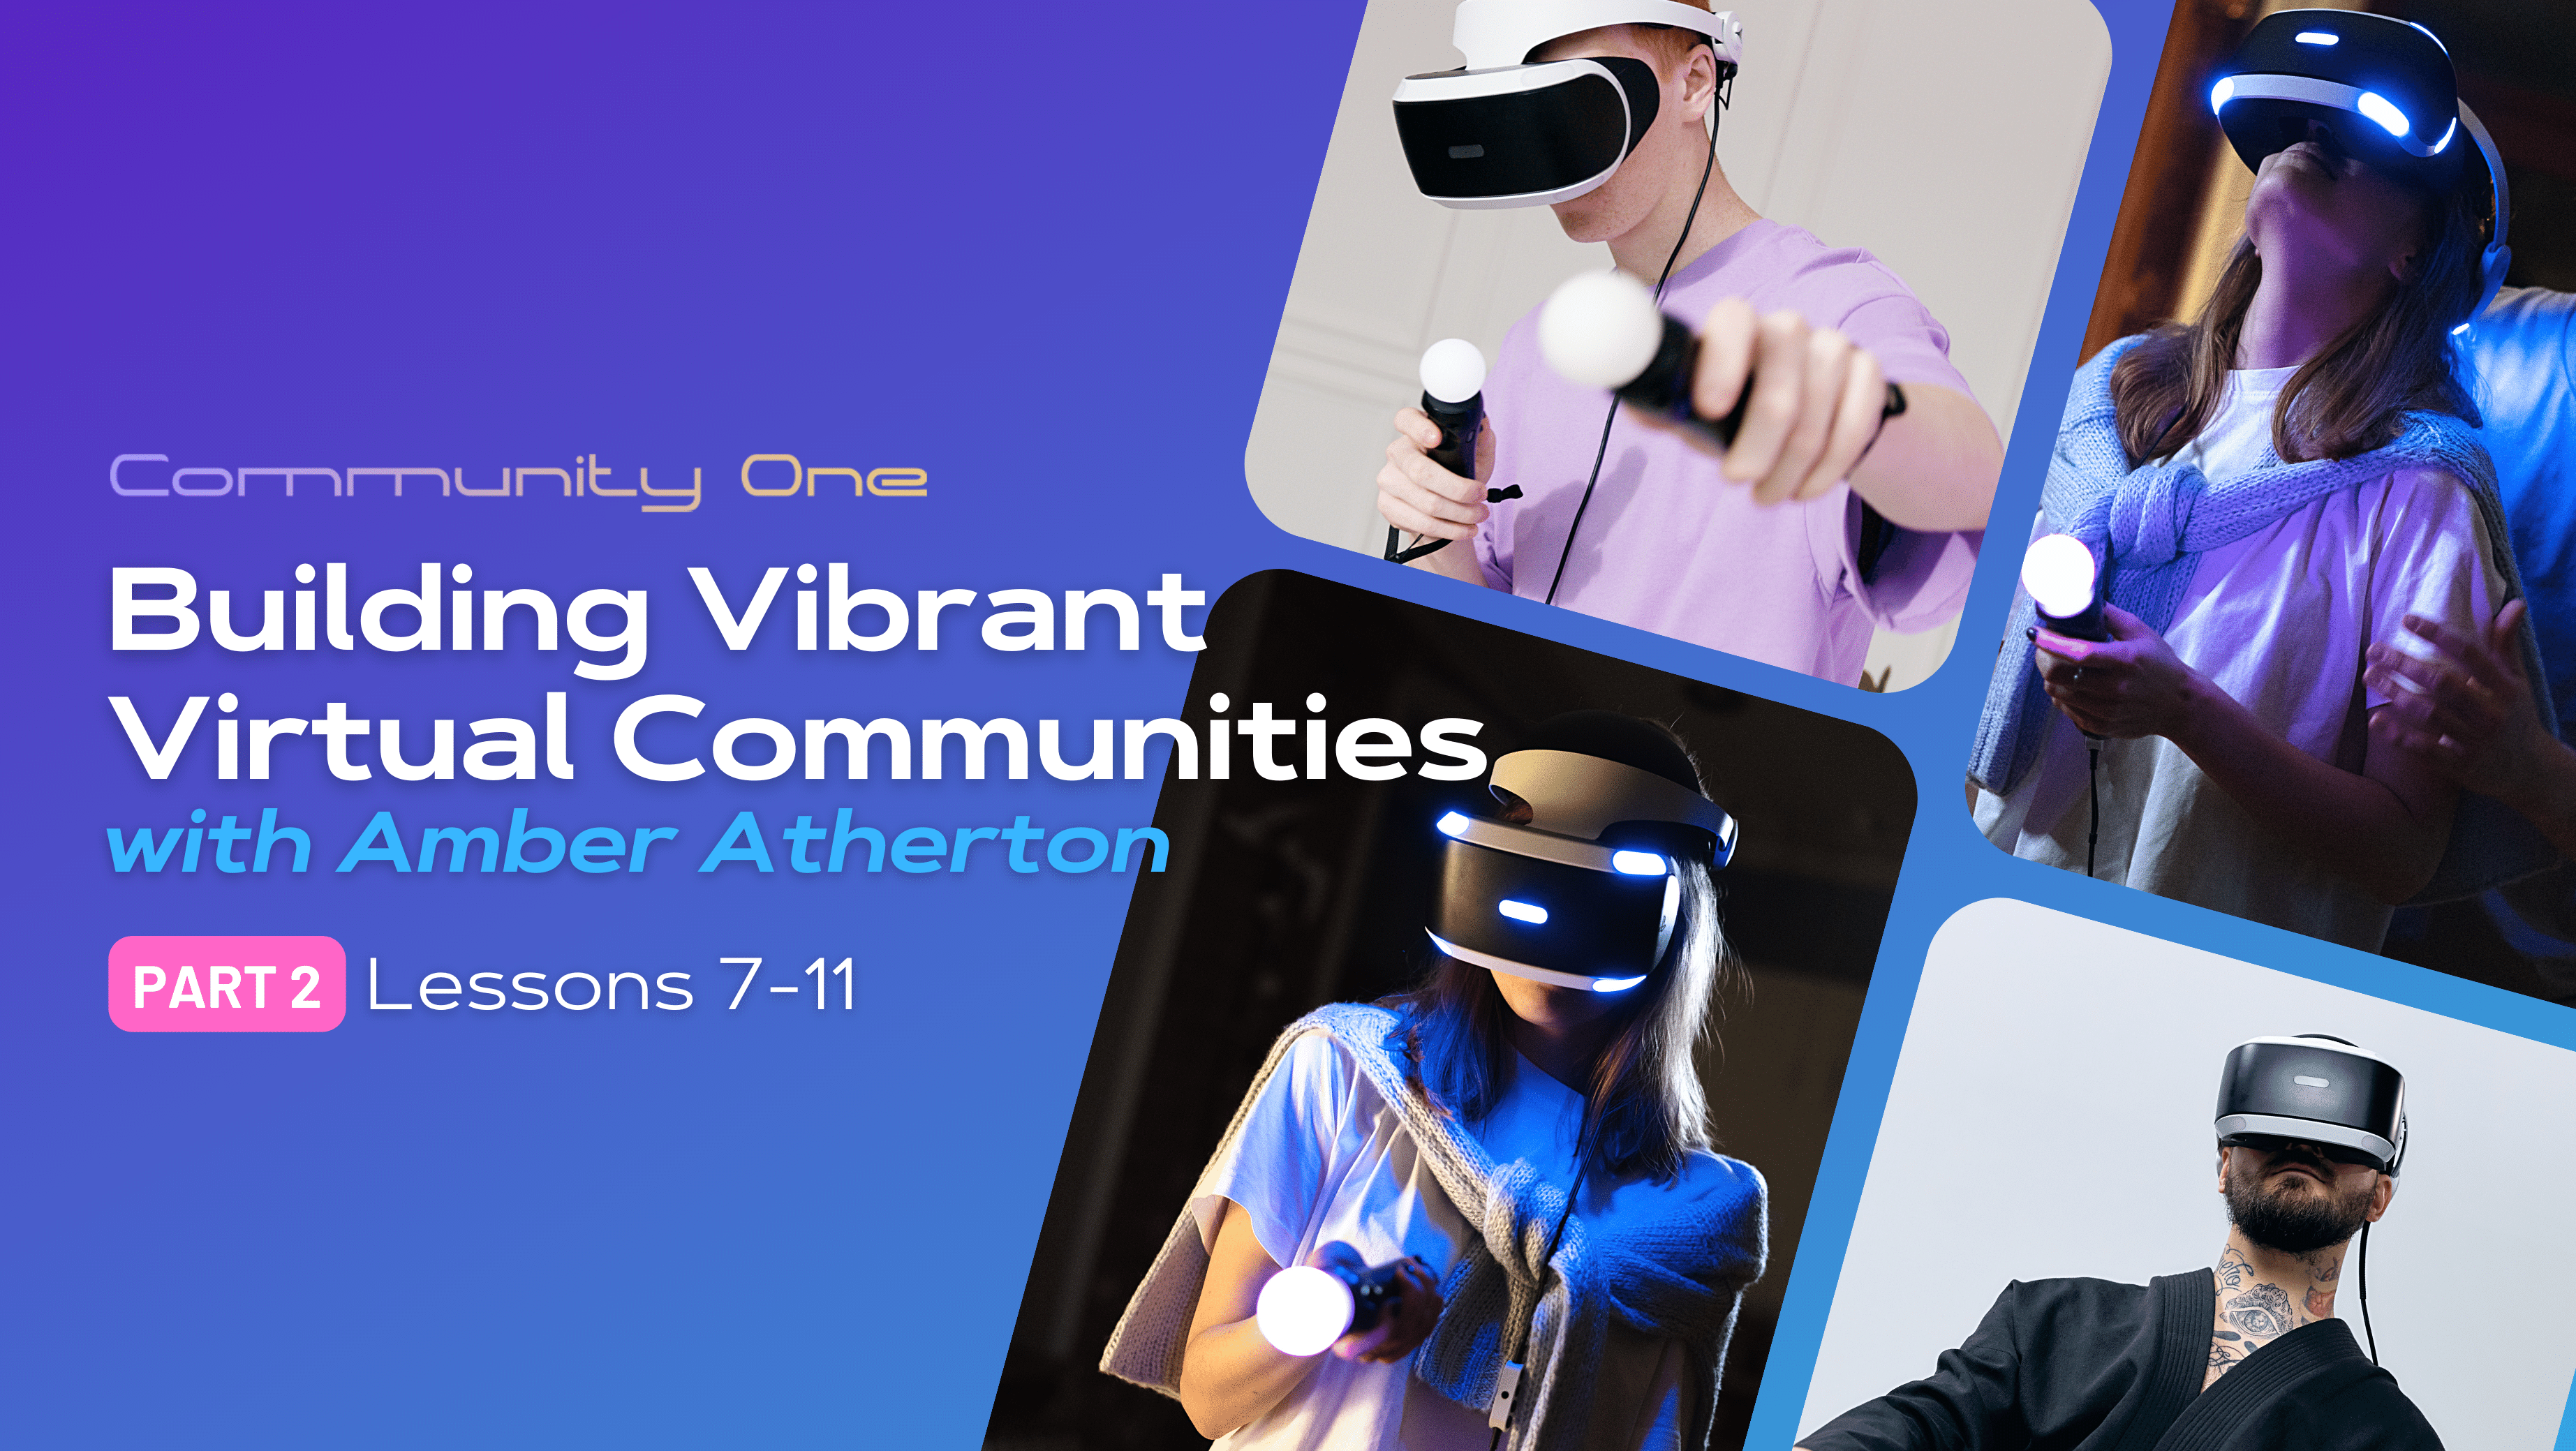 Part 2: Building Vibrant Virtual Communities with Amber Atherton: Lessons 7-11